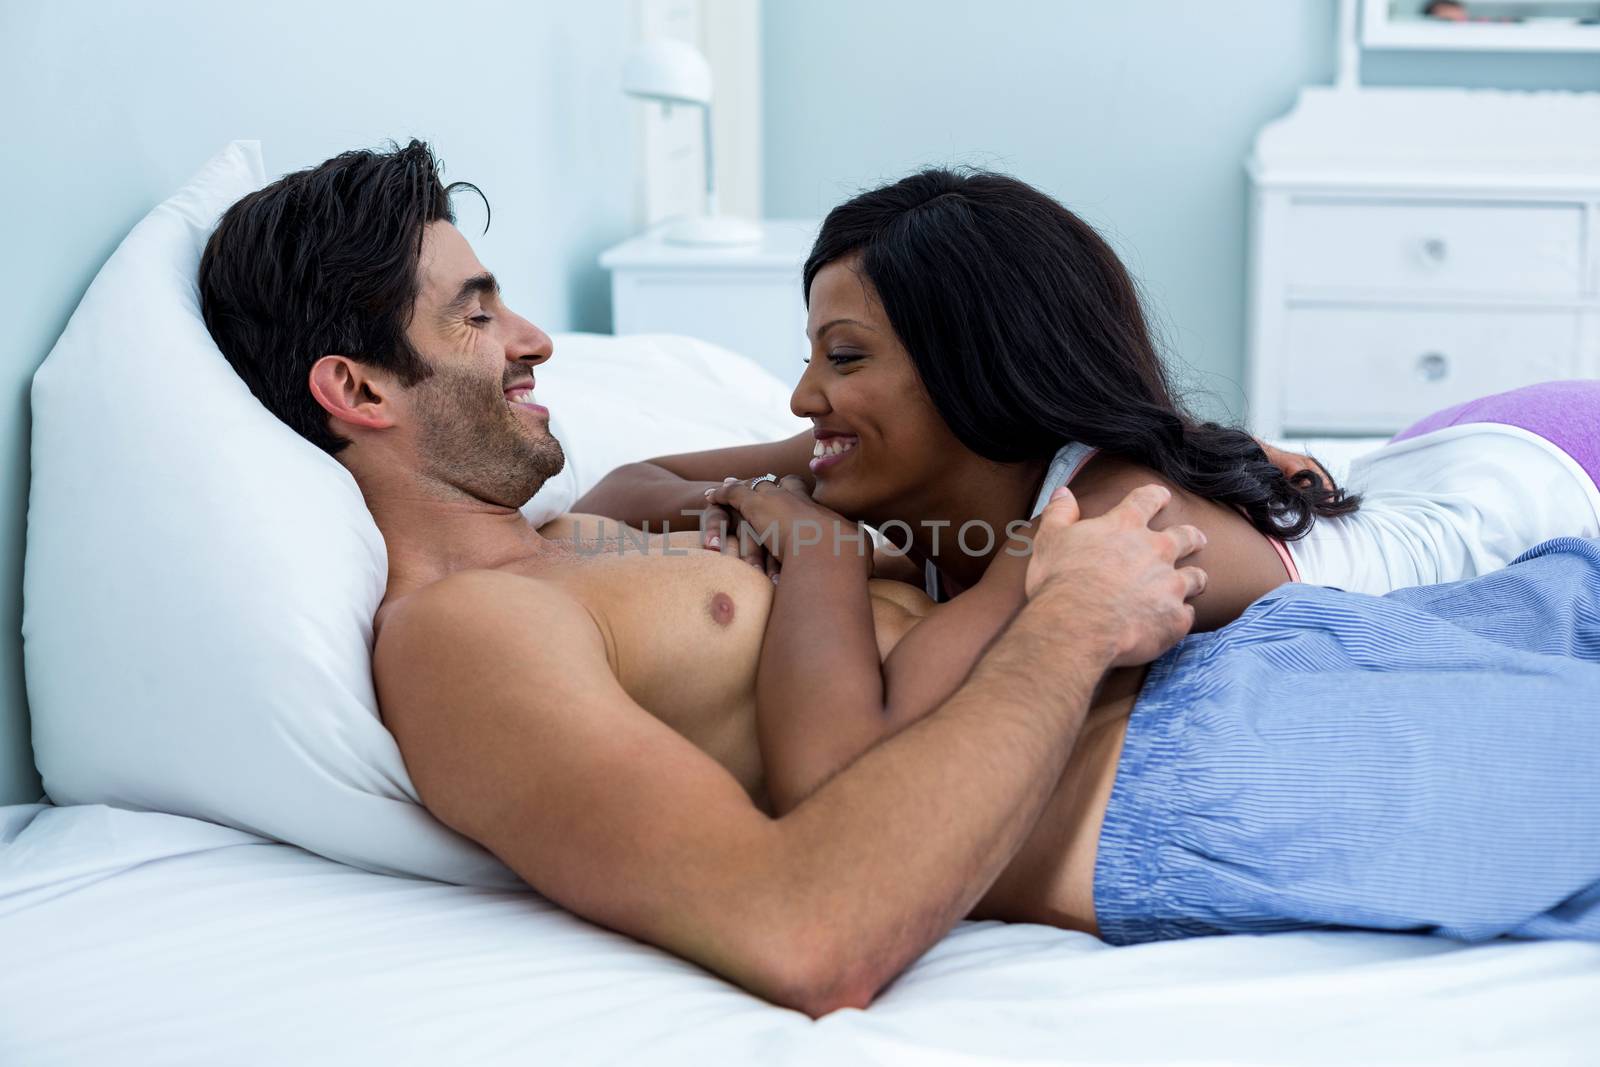 Romantic couple lying together on bed in bedroom